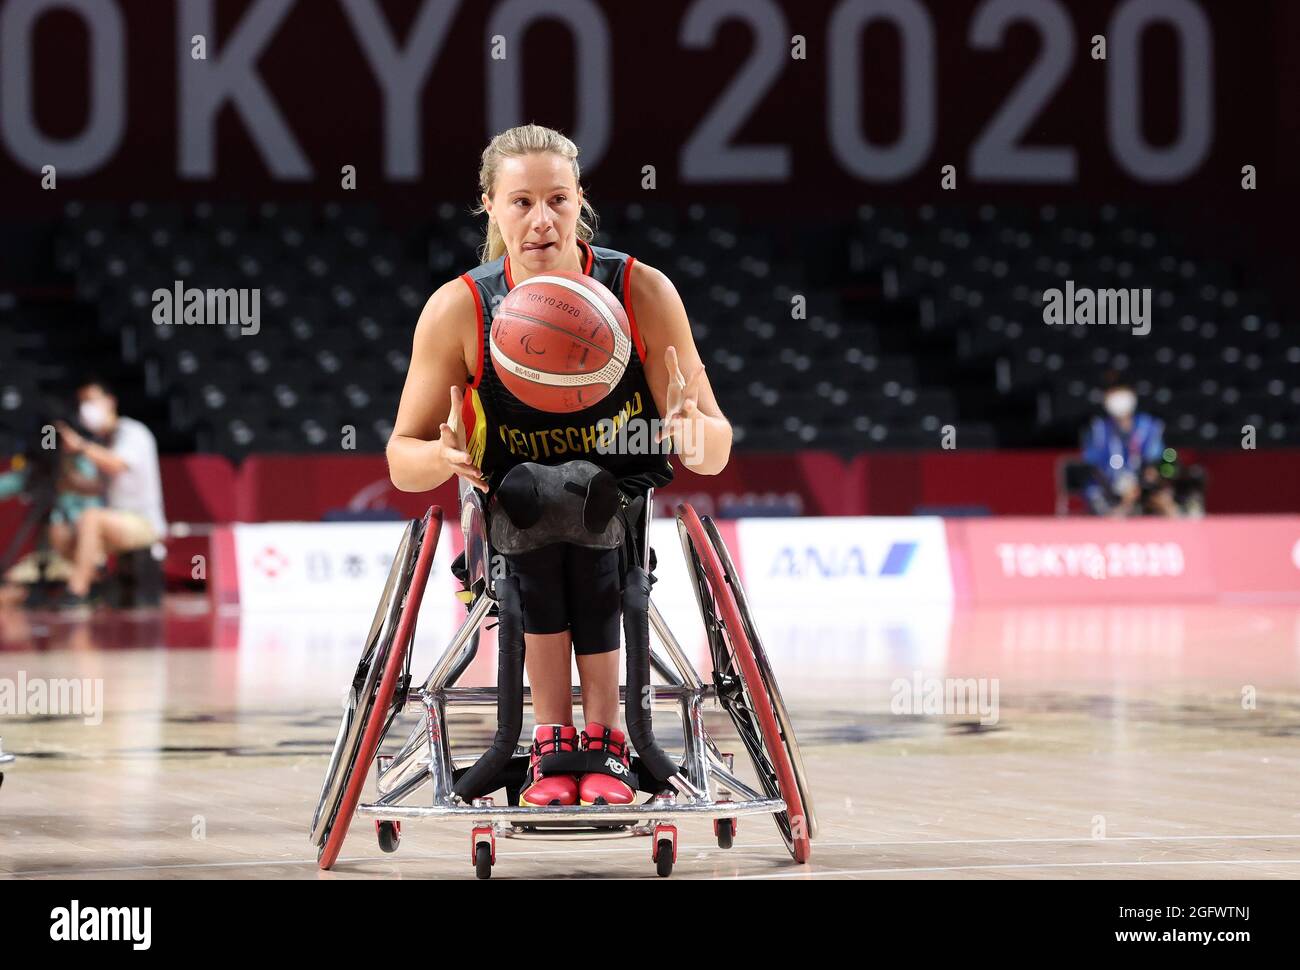 Tokyo 2020 Paralympic Games - Wheelchair Basketball - Women's Preliminary  Round Group A - Britain v Germany - Musashino Forest